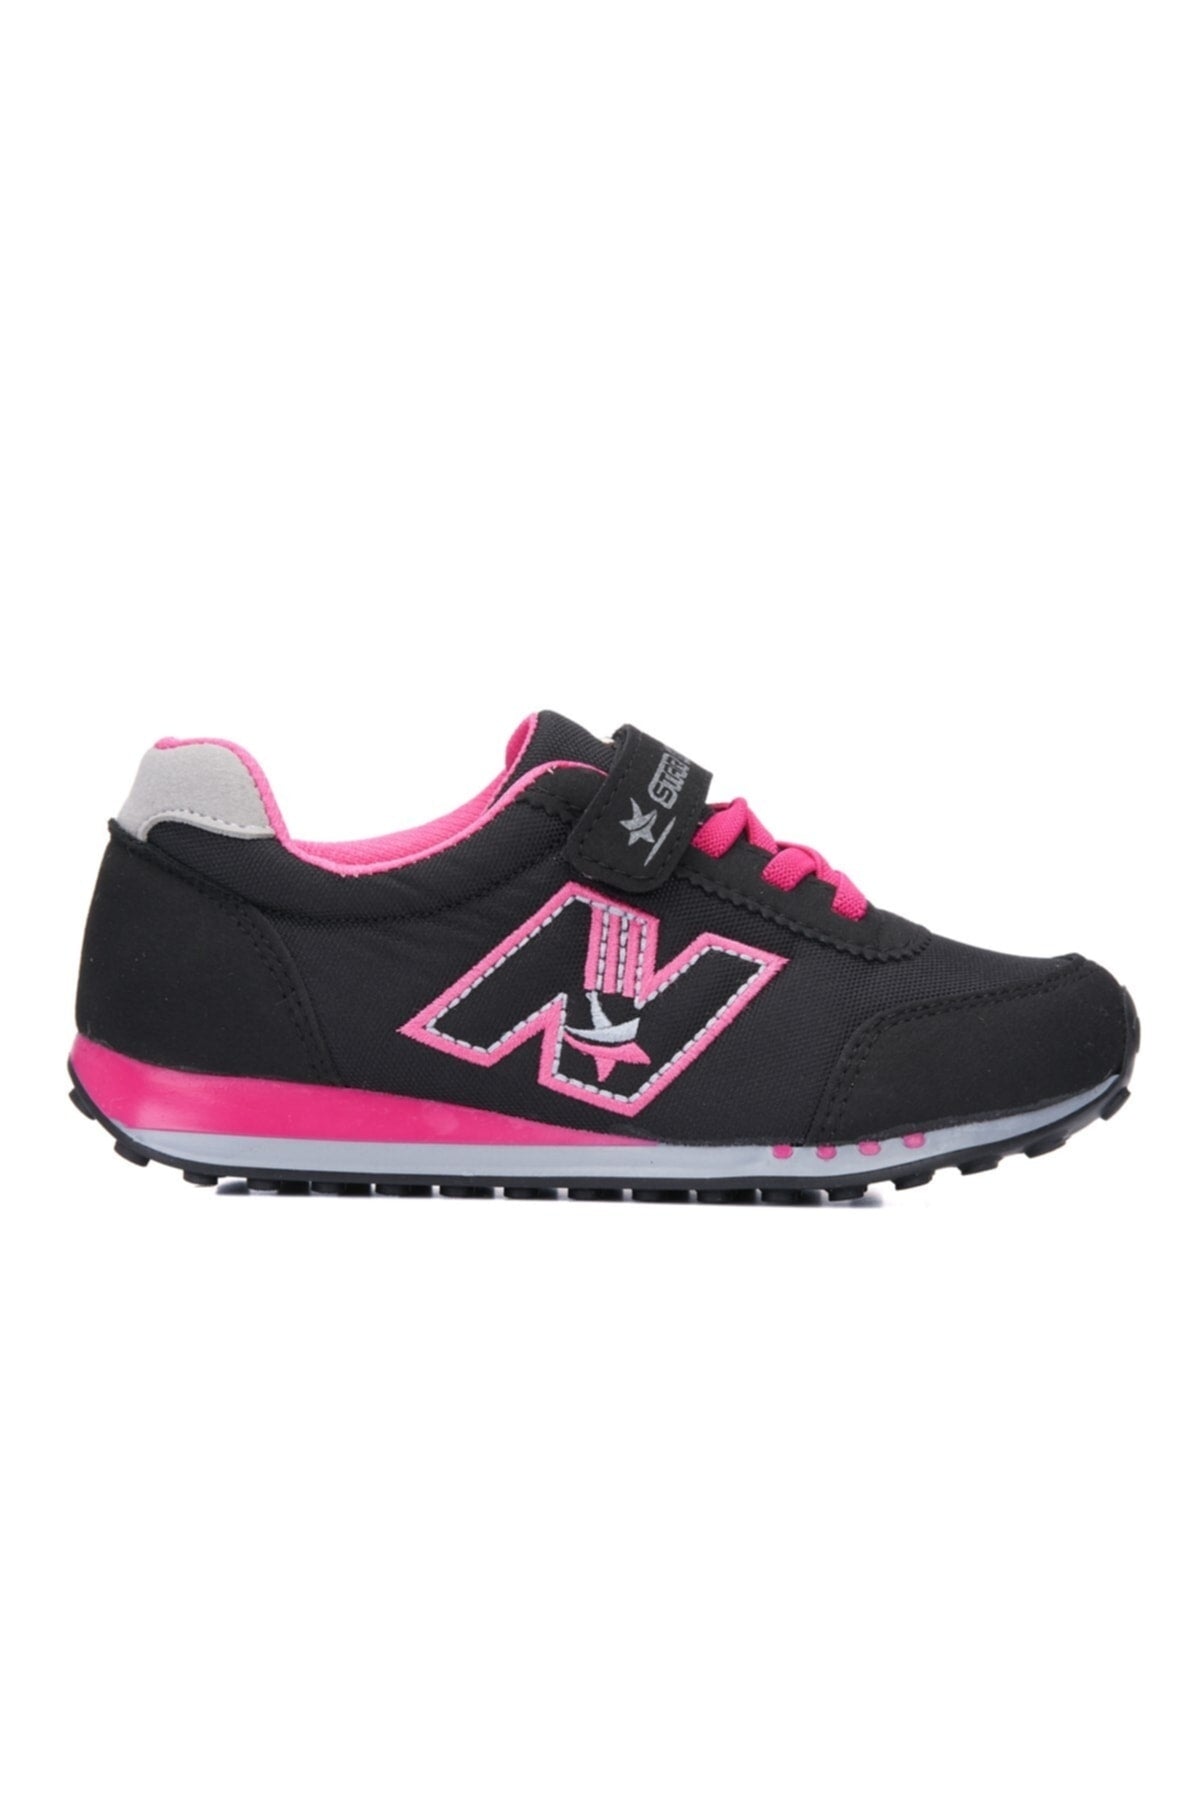 Black - Children's Sport Shoes Call and Laced Daily Casual Sneaker